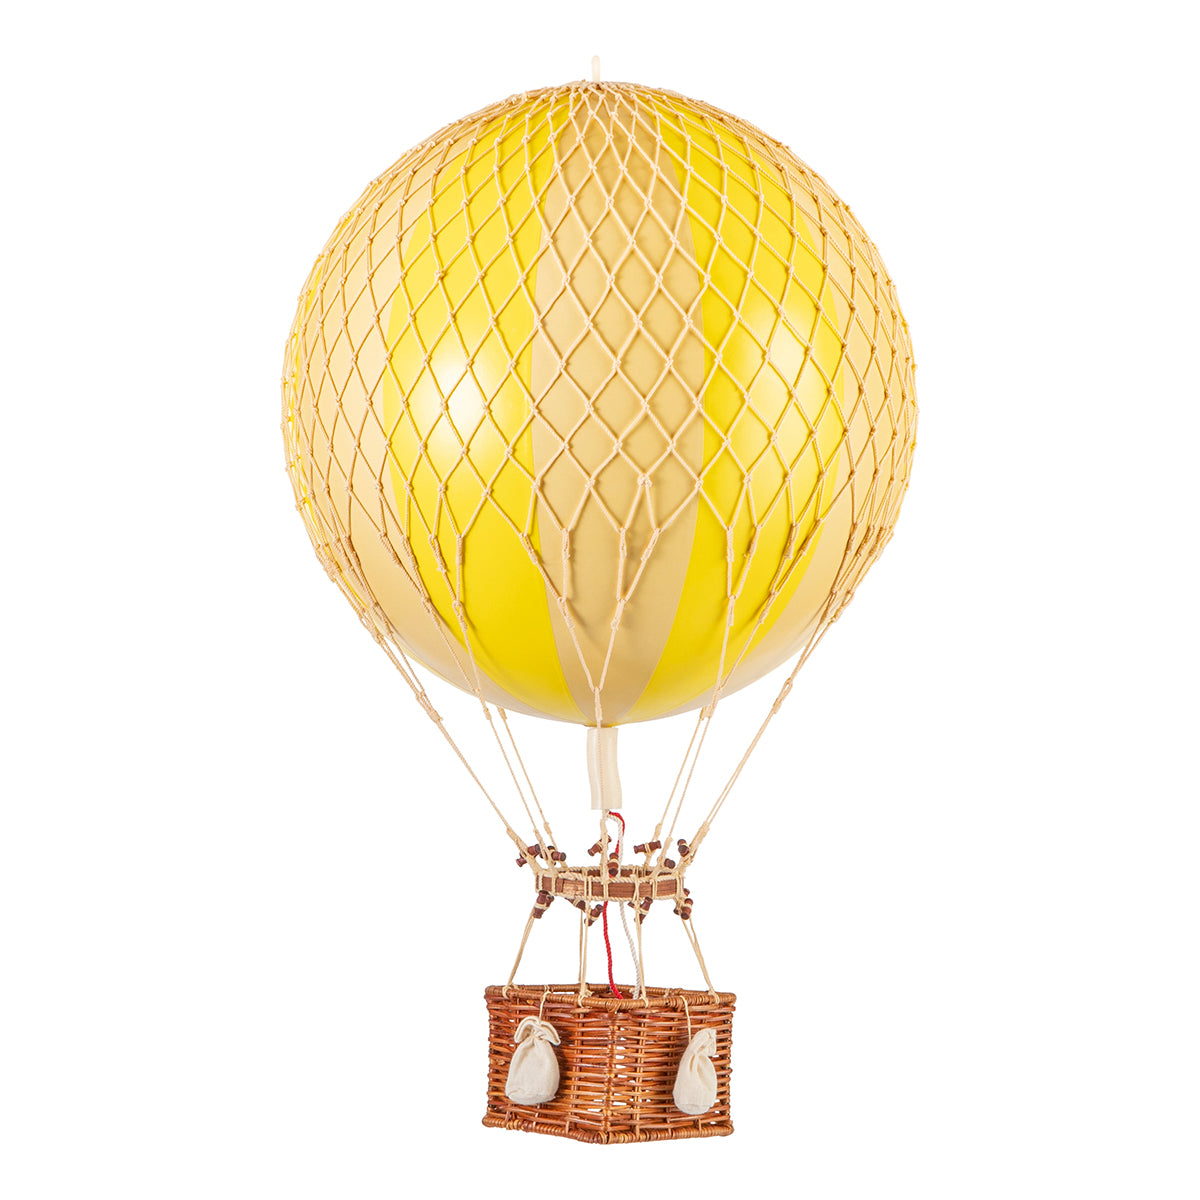 Experience a unique perspective as you soar to new heights in a Wonderen Medium Hot Air Balloon - Royal Aero with wicker basket from Wonderen Stroopwafels.